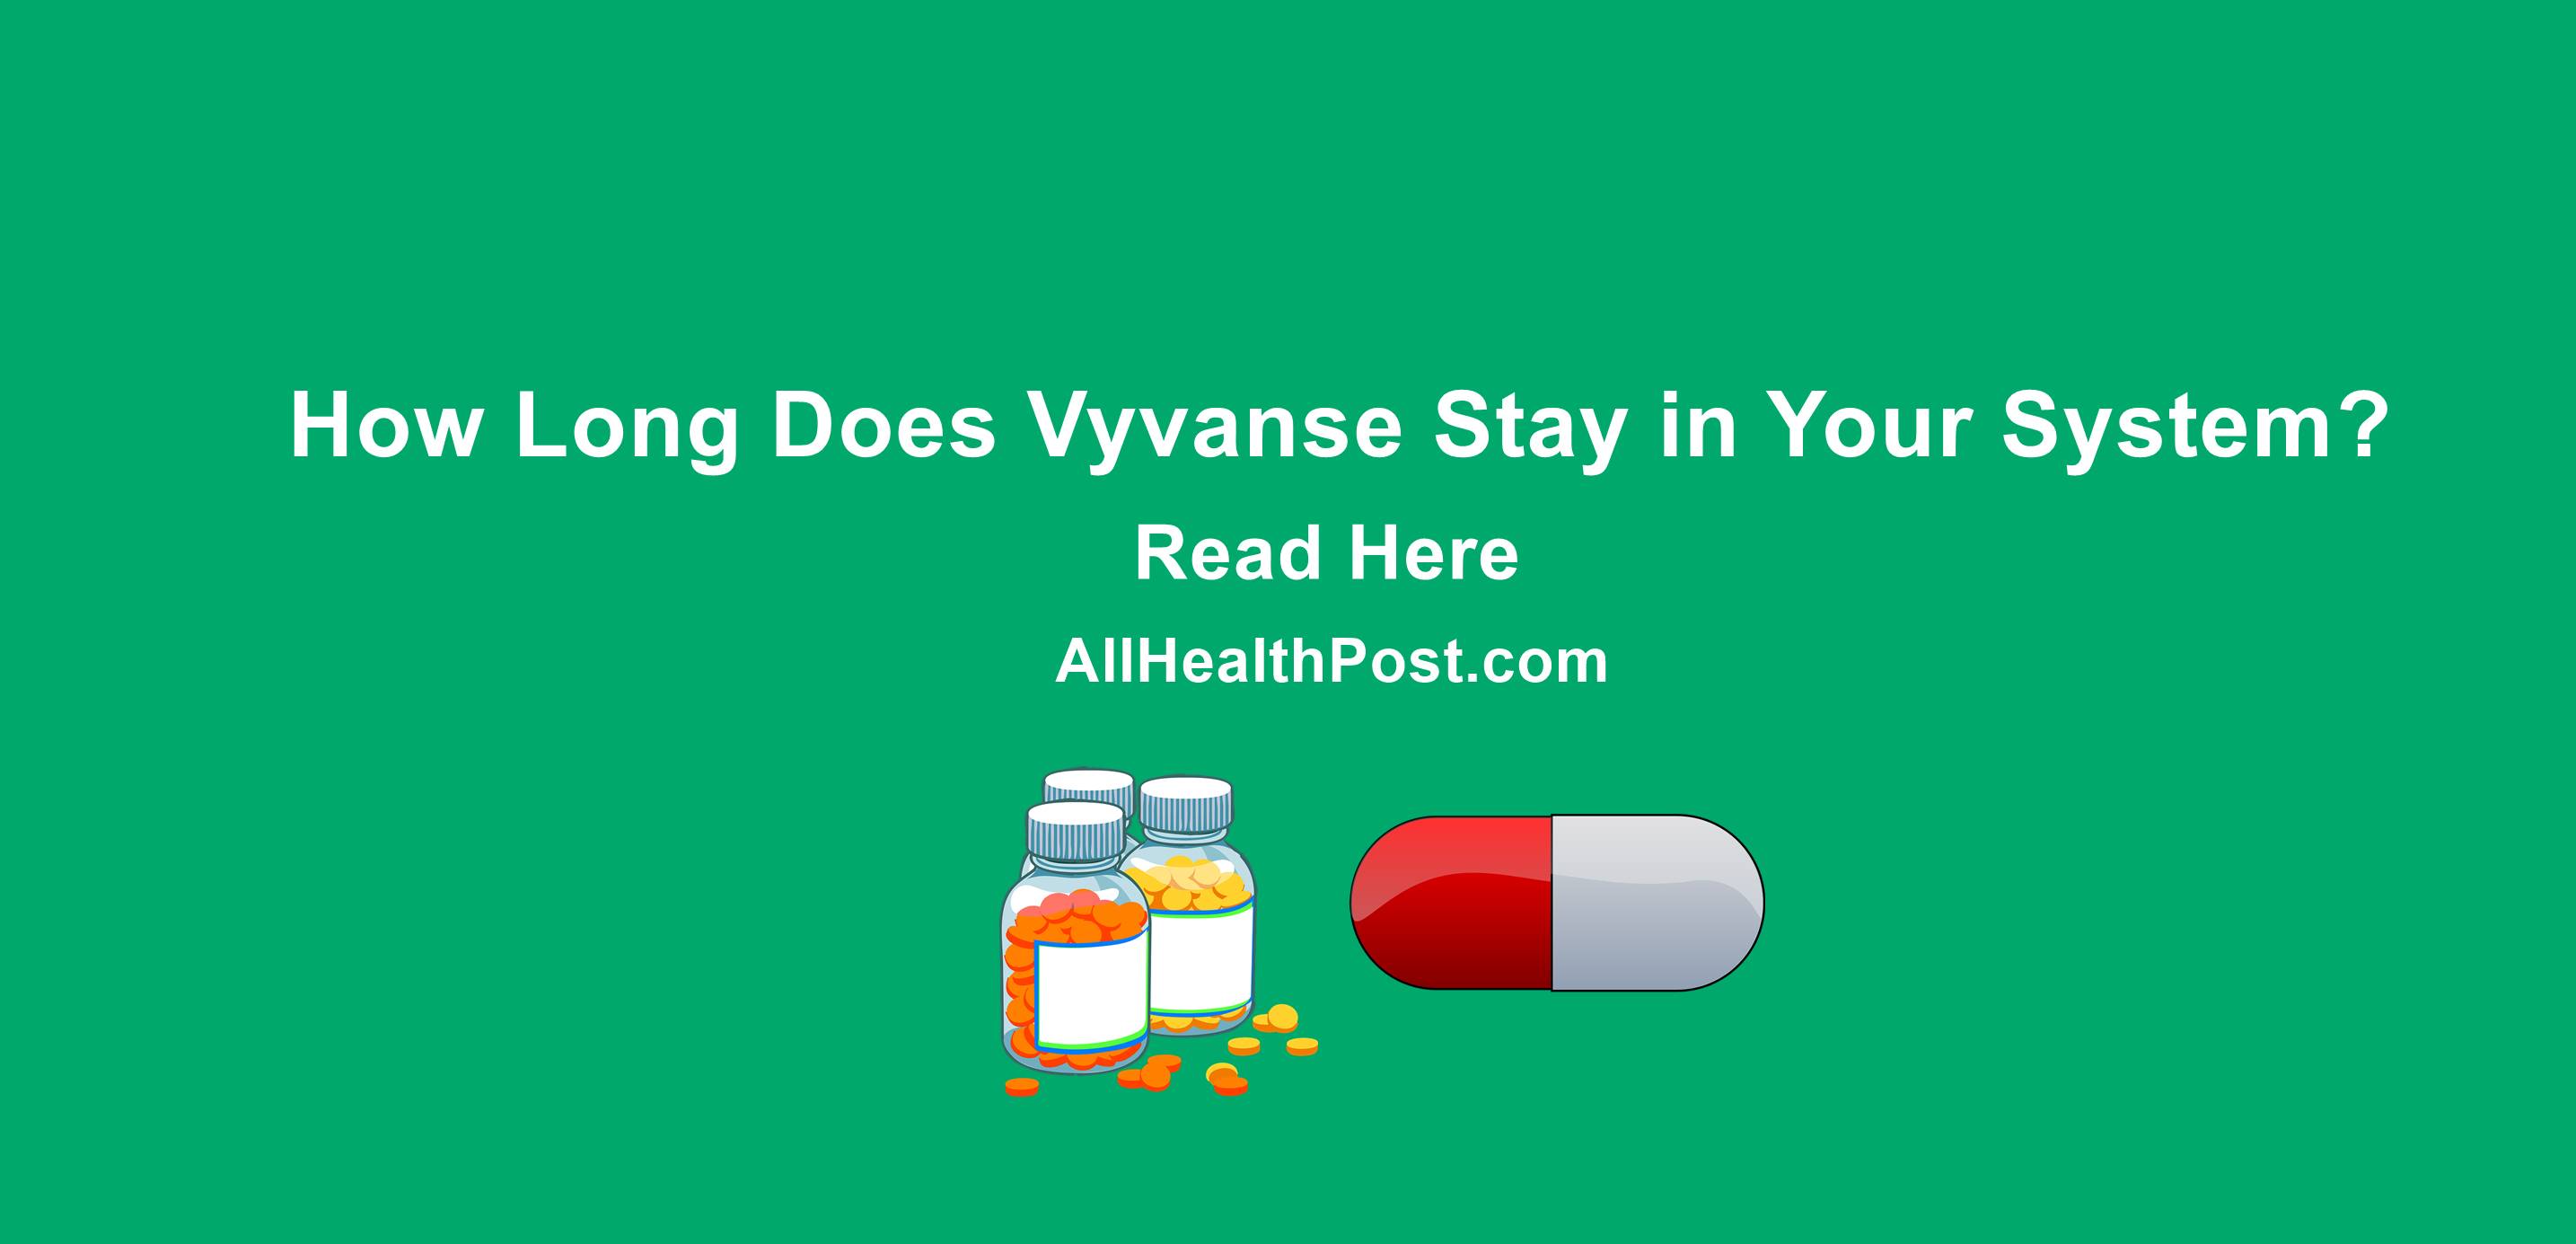 How Long Does Vyvanse Stay in Your System